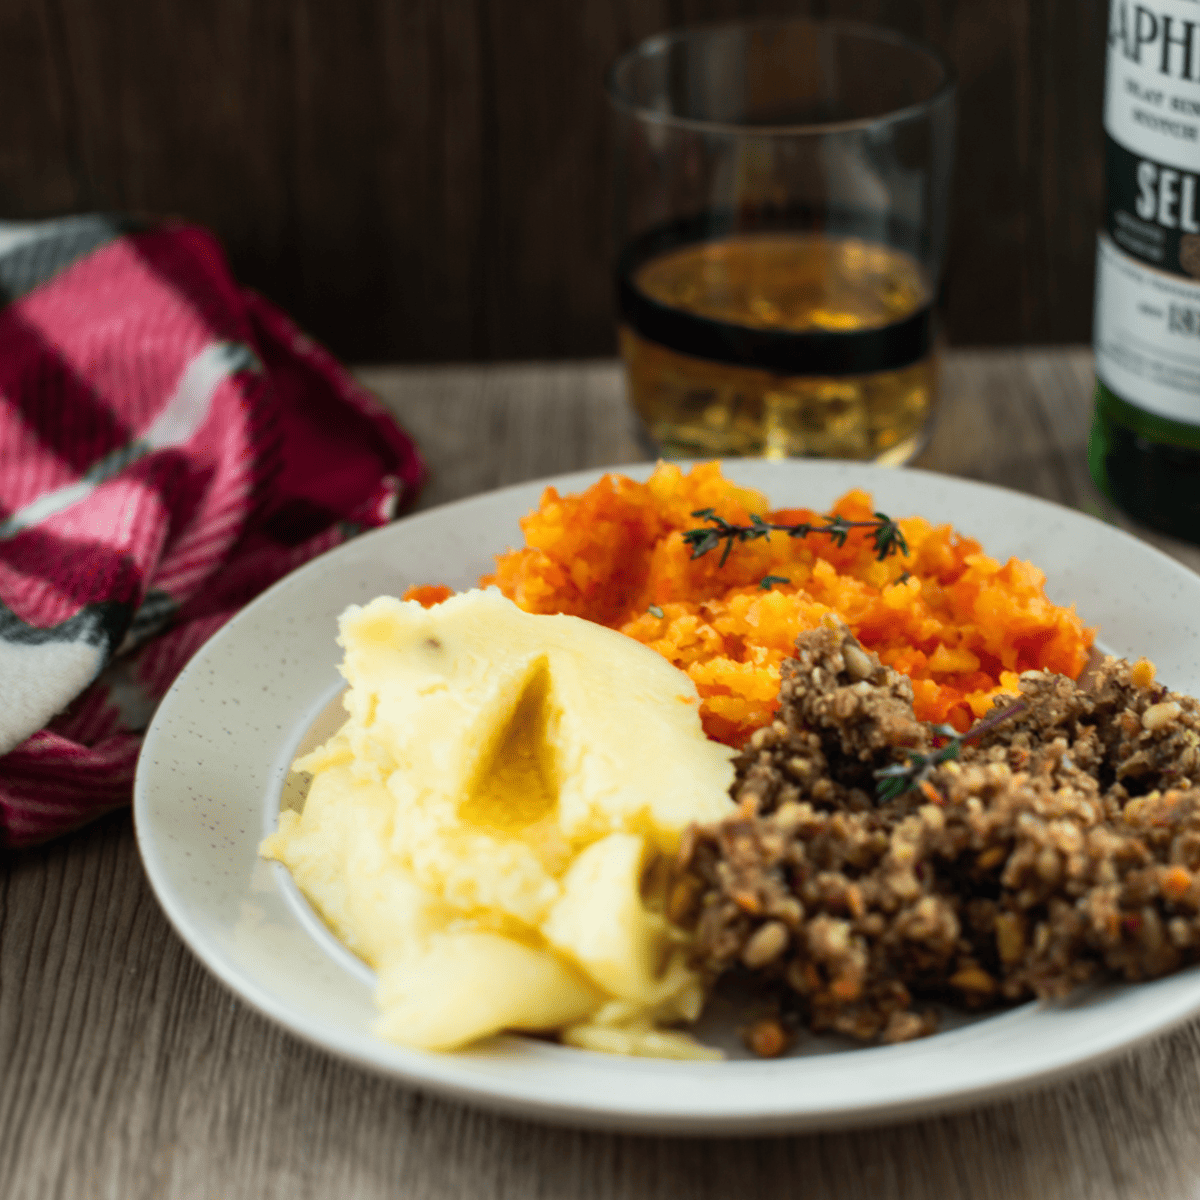 A plate with haggis and potatoes and swede for Burns night.